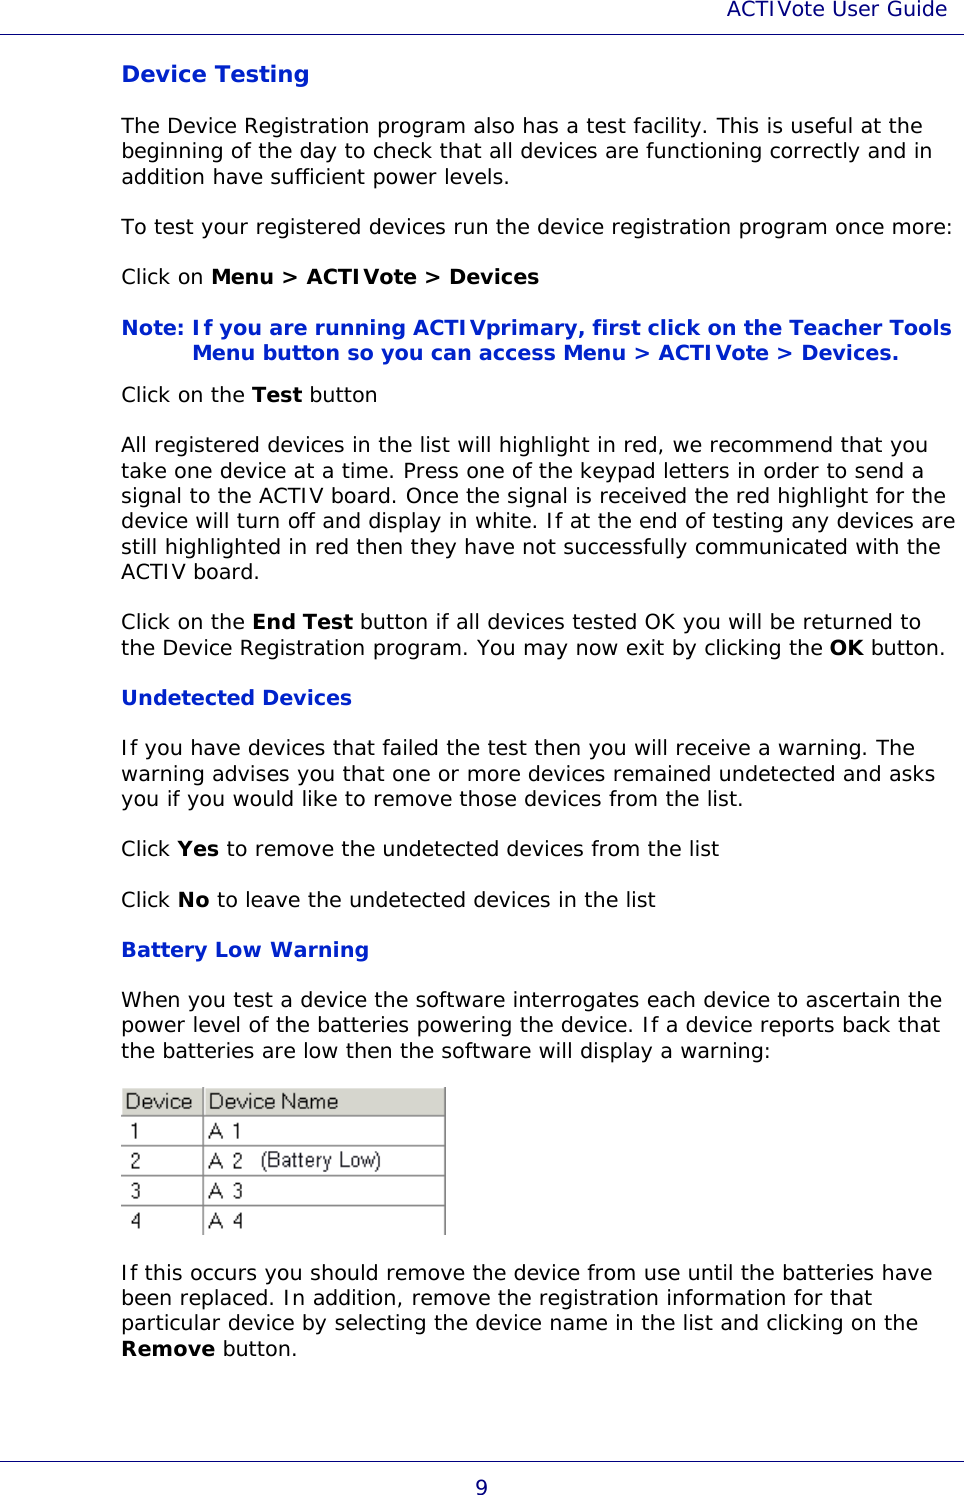 ACTIVote User Guide 9 Device Testing The Device Registration program also has a test facility. This is useful at the beginning of the day to check that all devices are functioning correctly and in addition have sufficient power levels. To test your registered devices run the device registration program once more: Click on Menu &gt; ACTIVote &gt; Devices Note: If you are running ACTIVprimary, first click on the Teacher Tools Menu button so you can access Menu &gt; ACTIVote &gt; Devices. Click on the Test button All registered devices in the list will highlight in red, we recommend that you take one device at a time. Press one of the keypad letters in order to send a signal to the ACTIV board. Once the signal is received the red highlight for the device will turn off and display in white. If at the end of testing any devices are still highlighted in red then they have not successfully communicated with the ACTIV board. Click on the End Test button if all devices tested OK you will be returned to the Device Registration program. You may now exit by clicking the OK button. Undetected Devices If you have devices that failed the test then you will receive a warning. The warning advises you that one or more devices remained undetected and asks you if you would like to remove those devices from the list.  Click Yes to remove the undetected devices from the list  Click No to leave the undetected devices in the list  Battery Low Warning  When you test a device the software interrogates each device to ascertain the power level of the batteries powering the device. If a device reports back that the batteries are low then the software will display a warning:  If this occurs you should remove the device from use until the batteries have been replaced. In addition, remove the registration information for that particular device by selecting the device name in the list and clicking on the Remove button. 